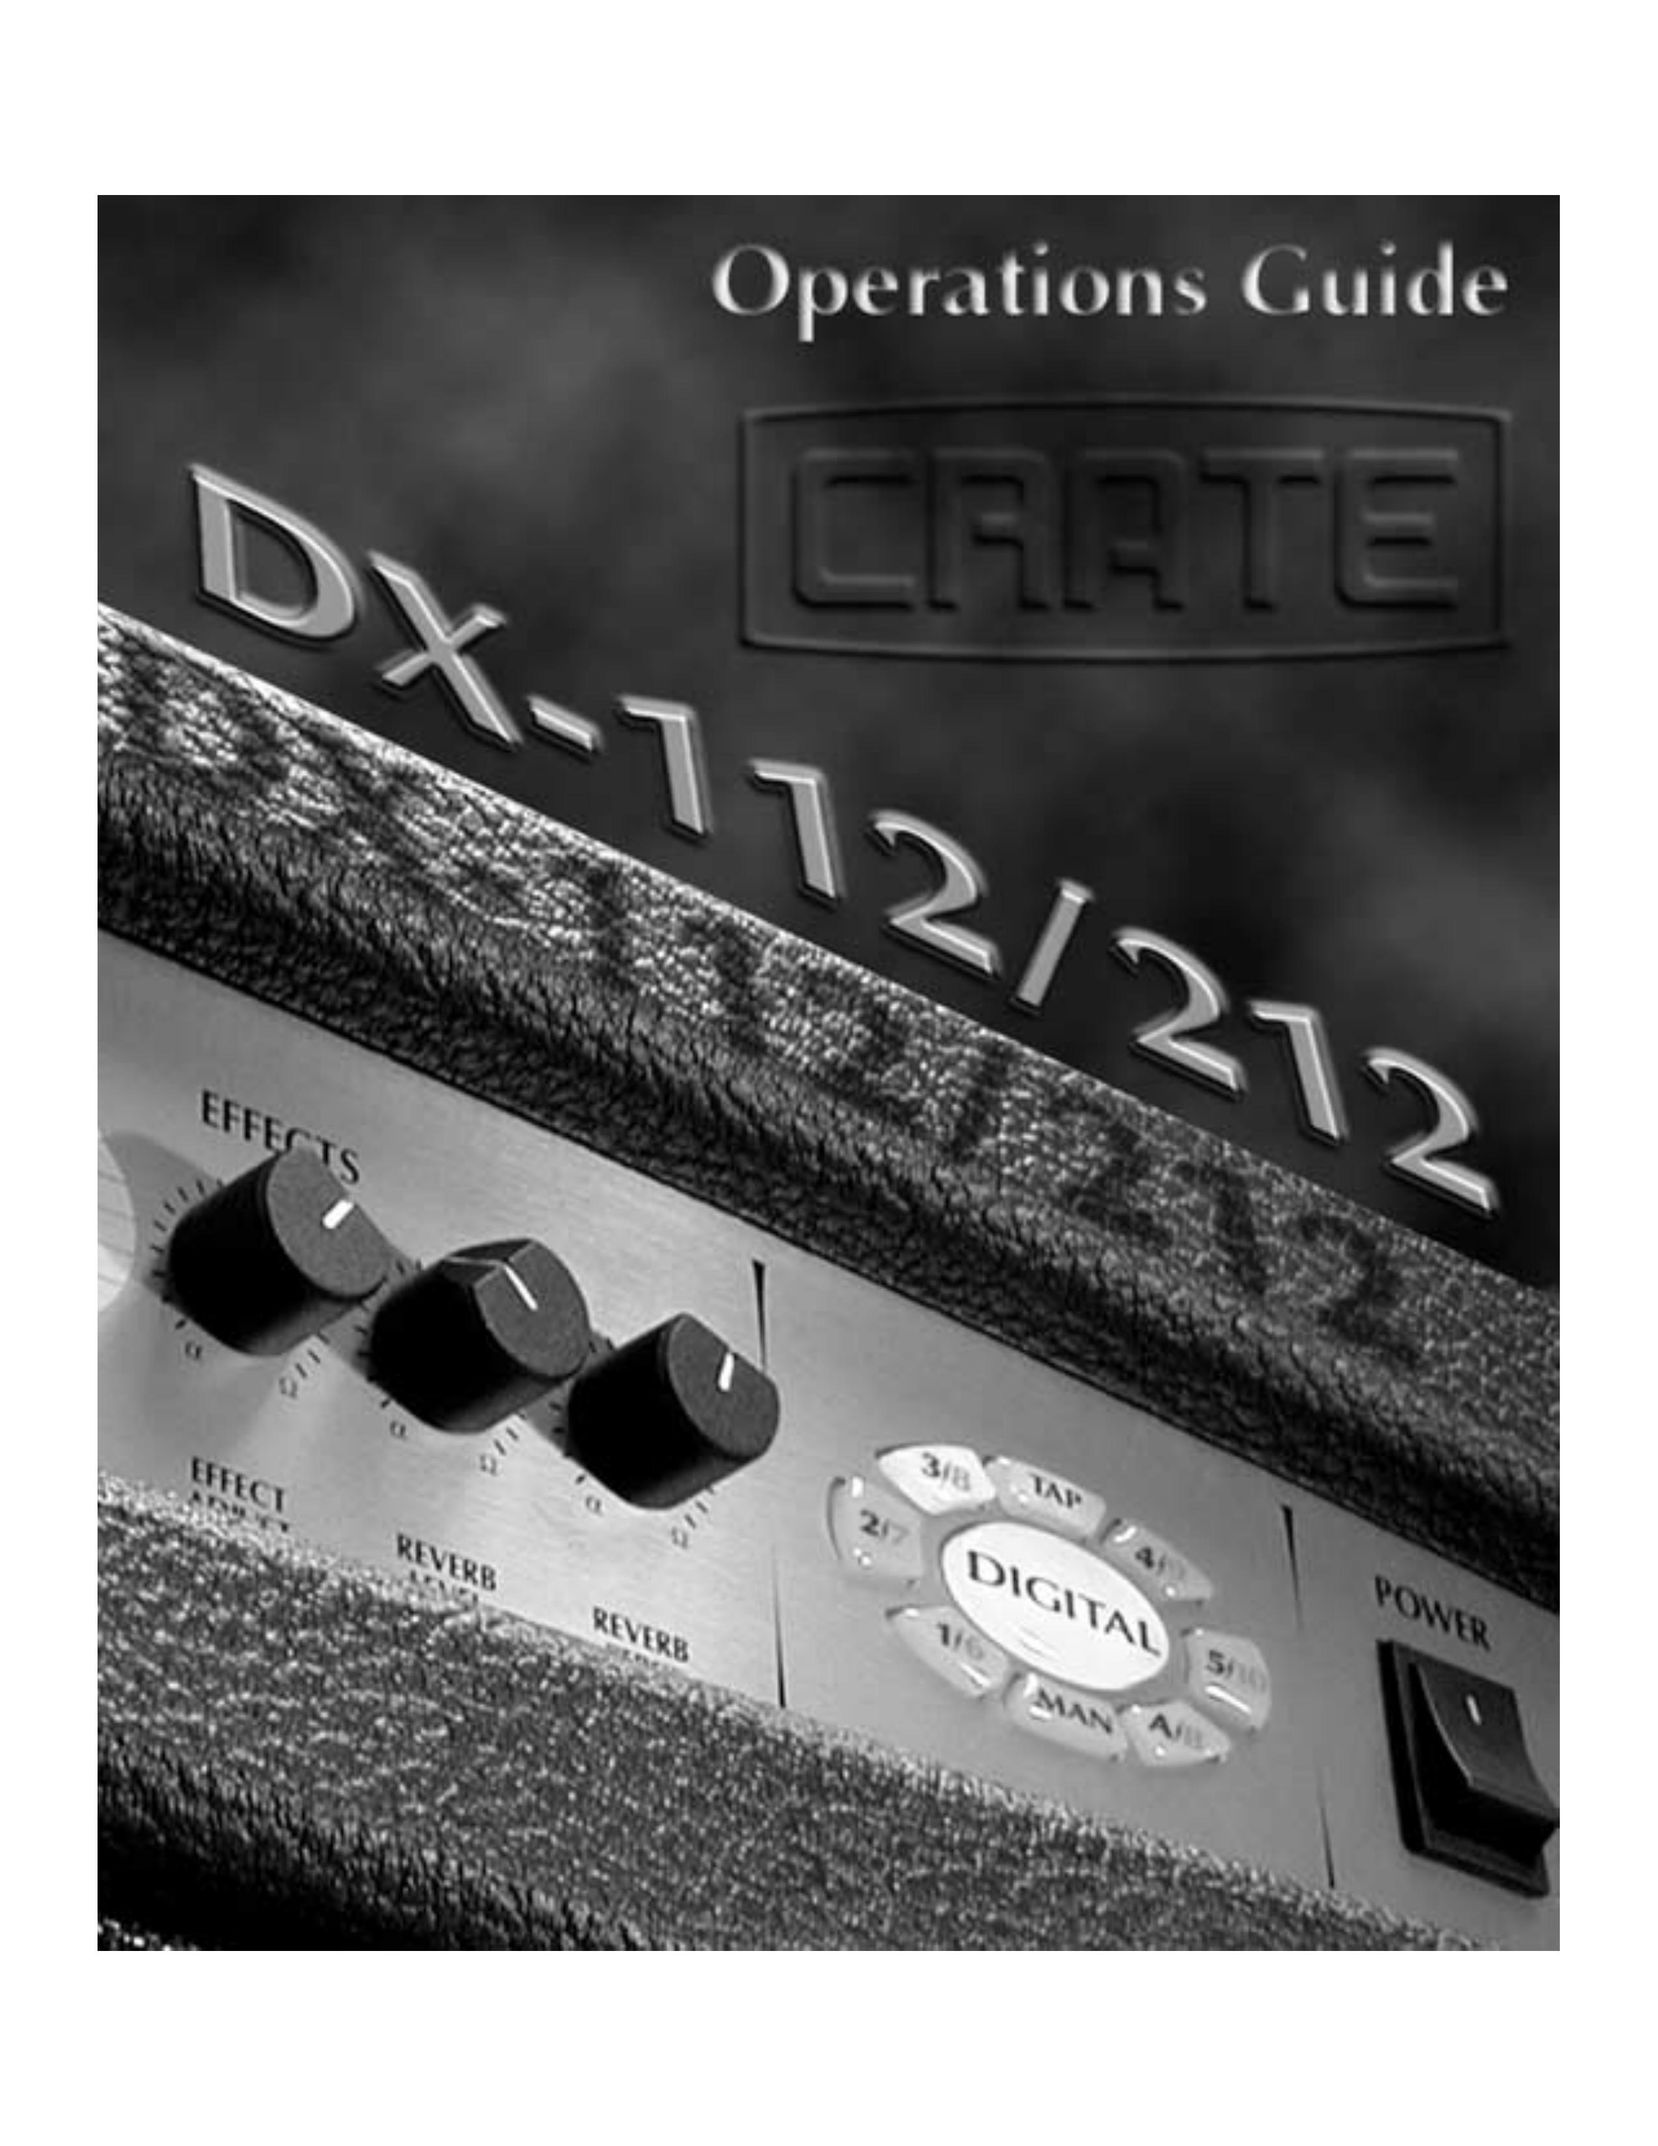 Crate Amplifiers DX-212 Stereo Amplifier User Manual